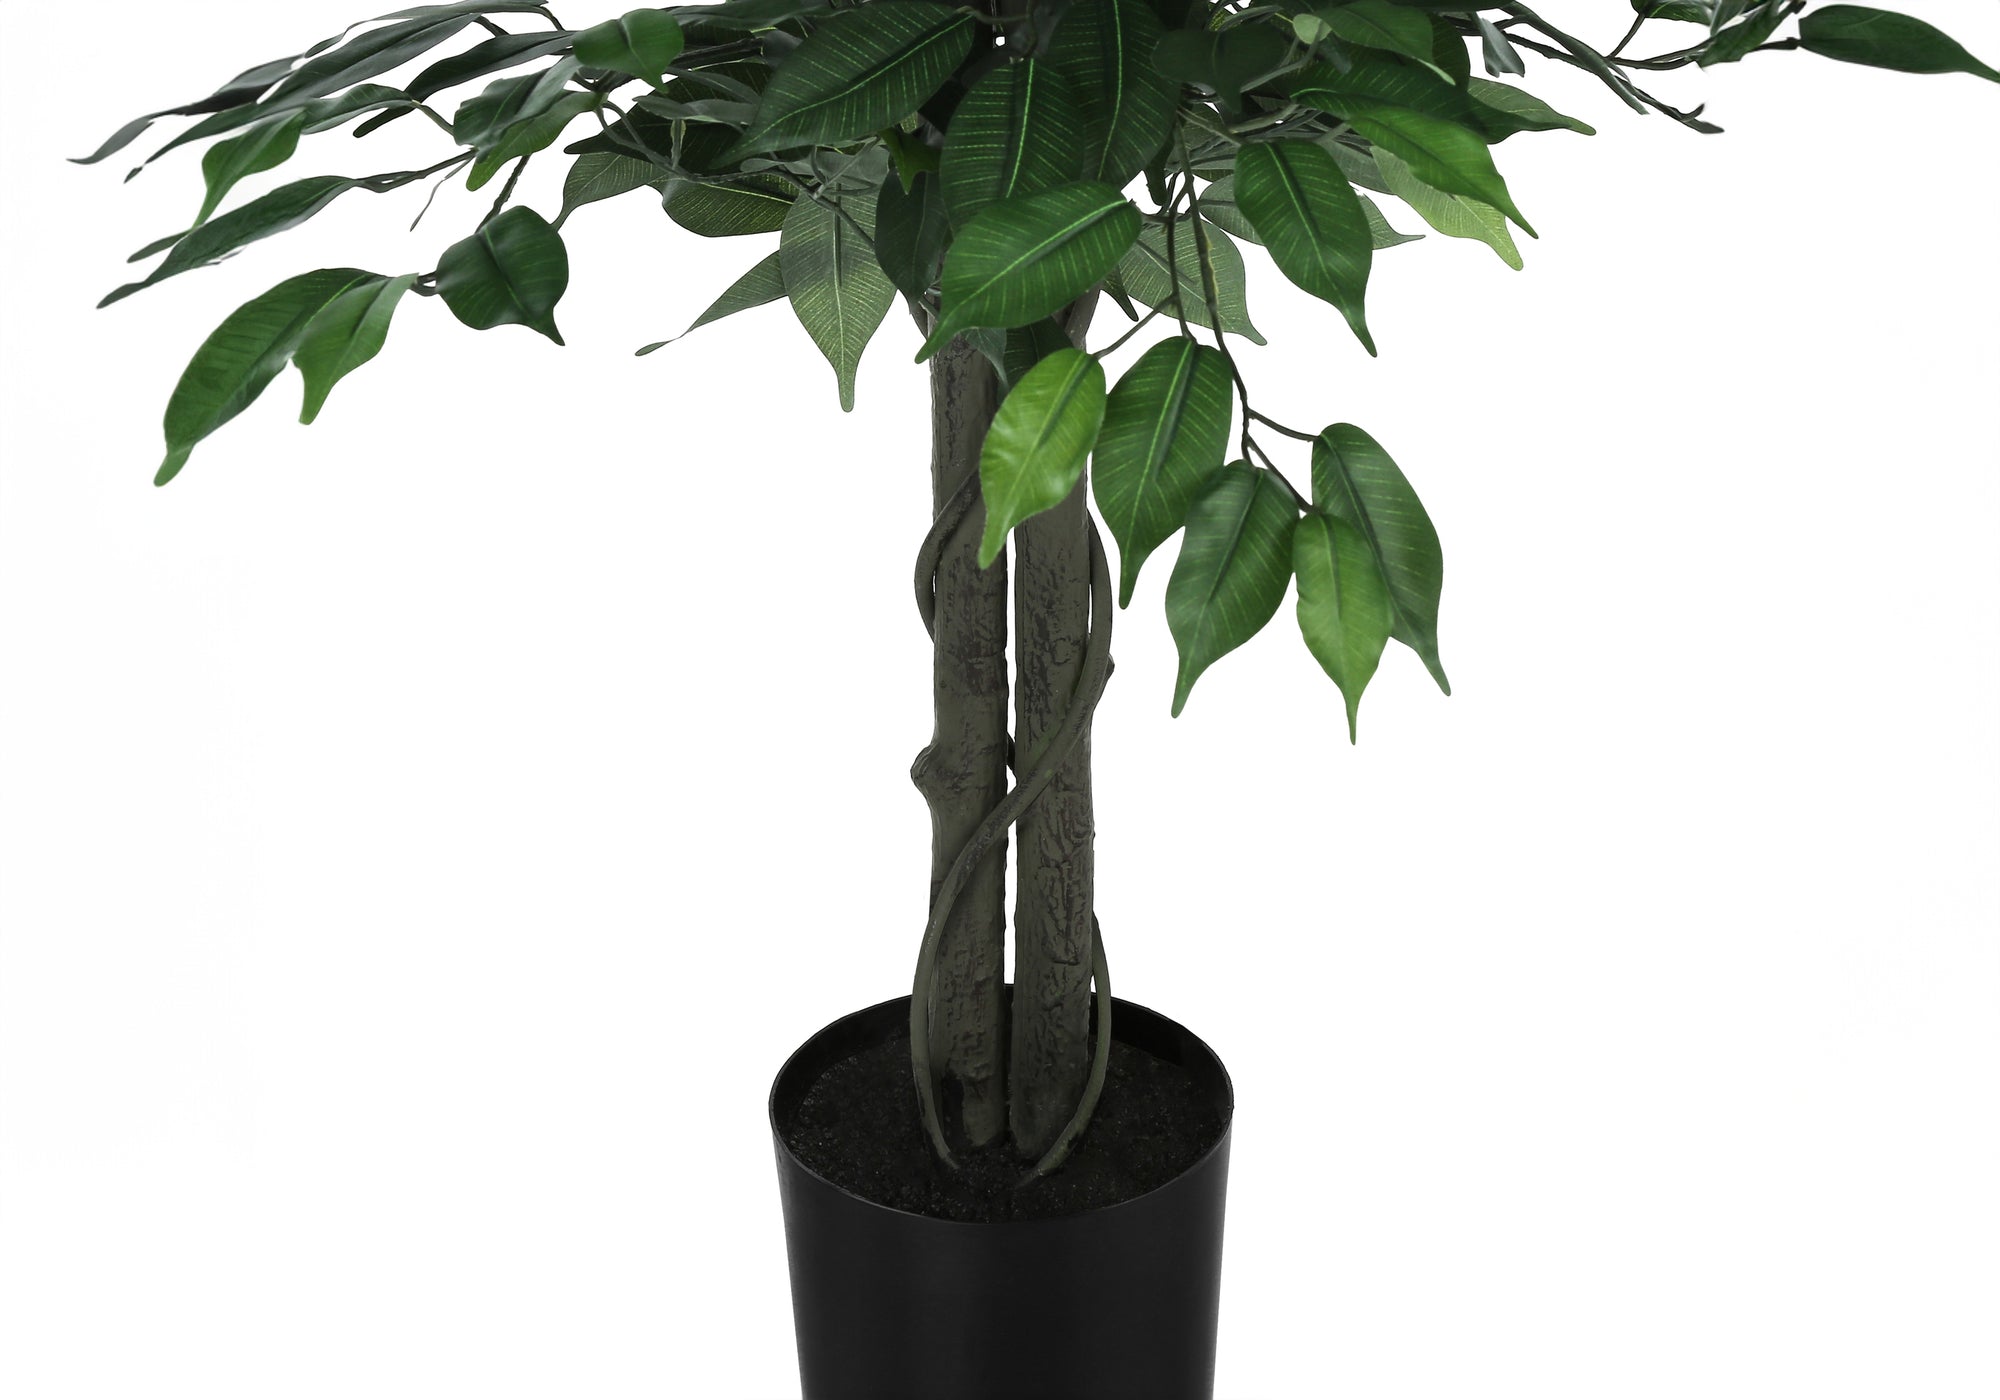 MN-579564    Artificial Plant, 58" Tall, Ficus Tree, Indoor, Faux, Fake, Floor, Greenery, Potted, Decorative, Green Leaves, Black Pot